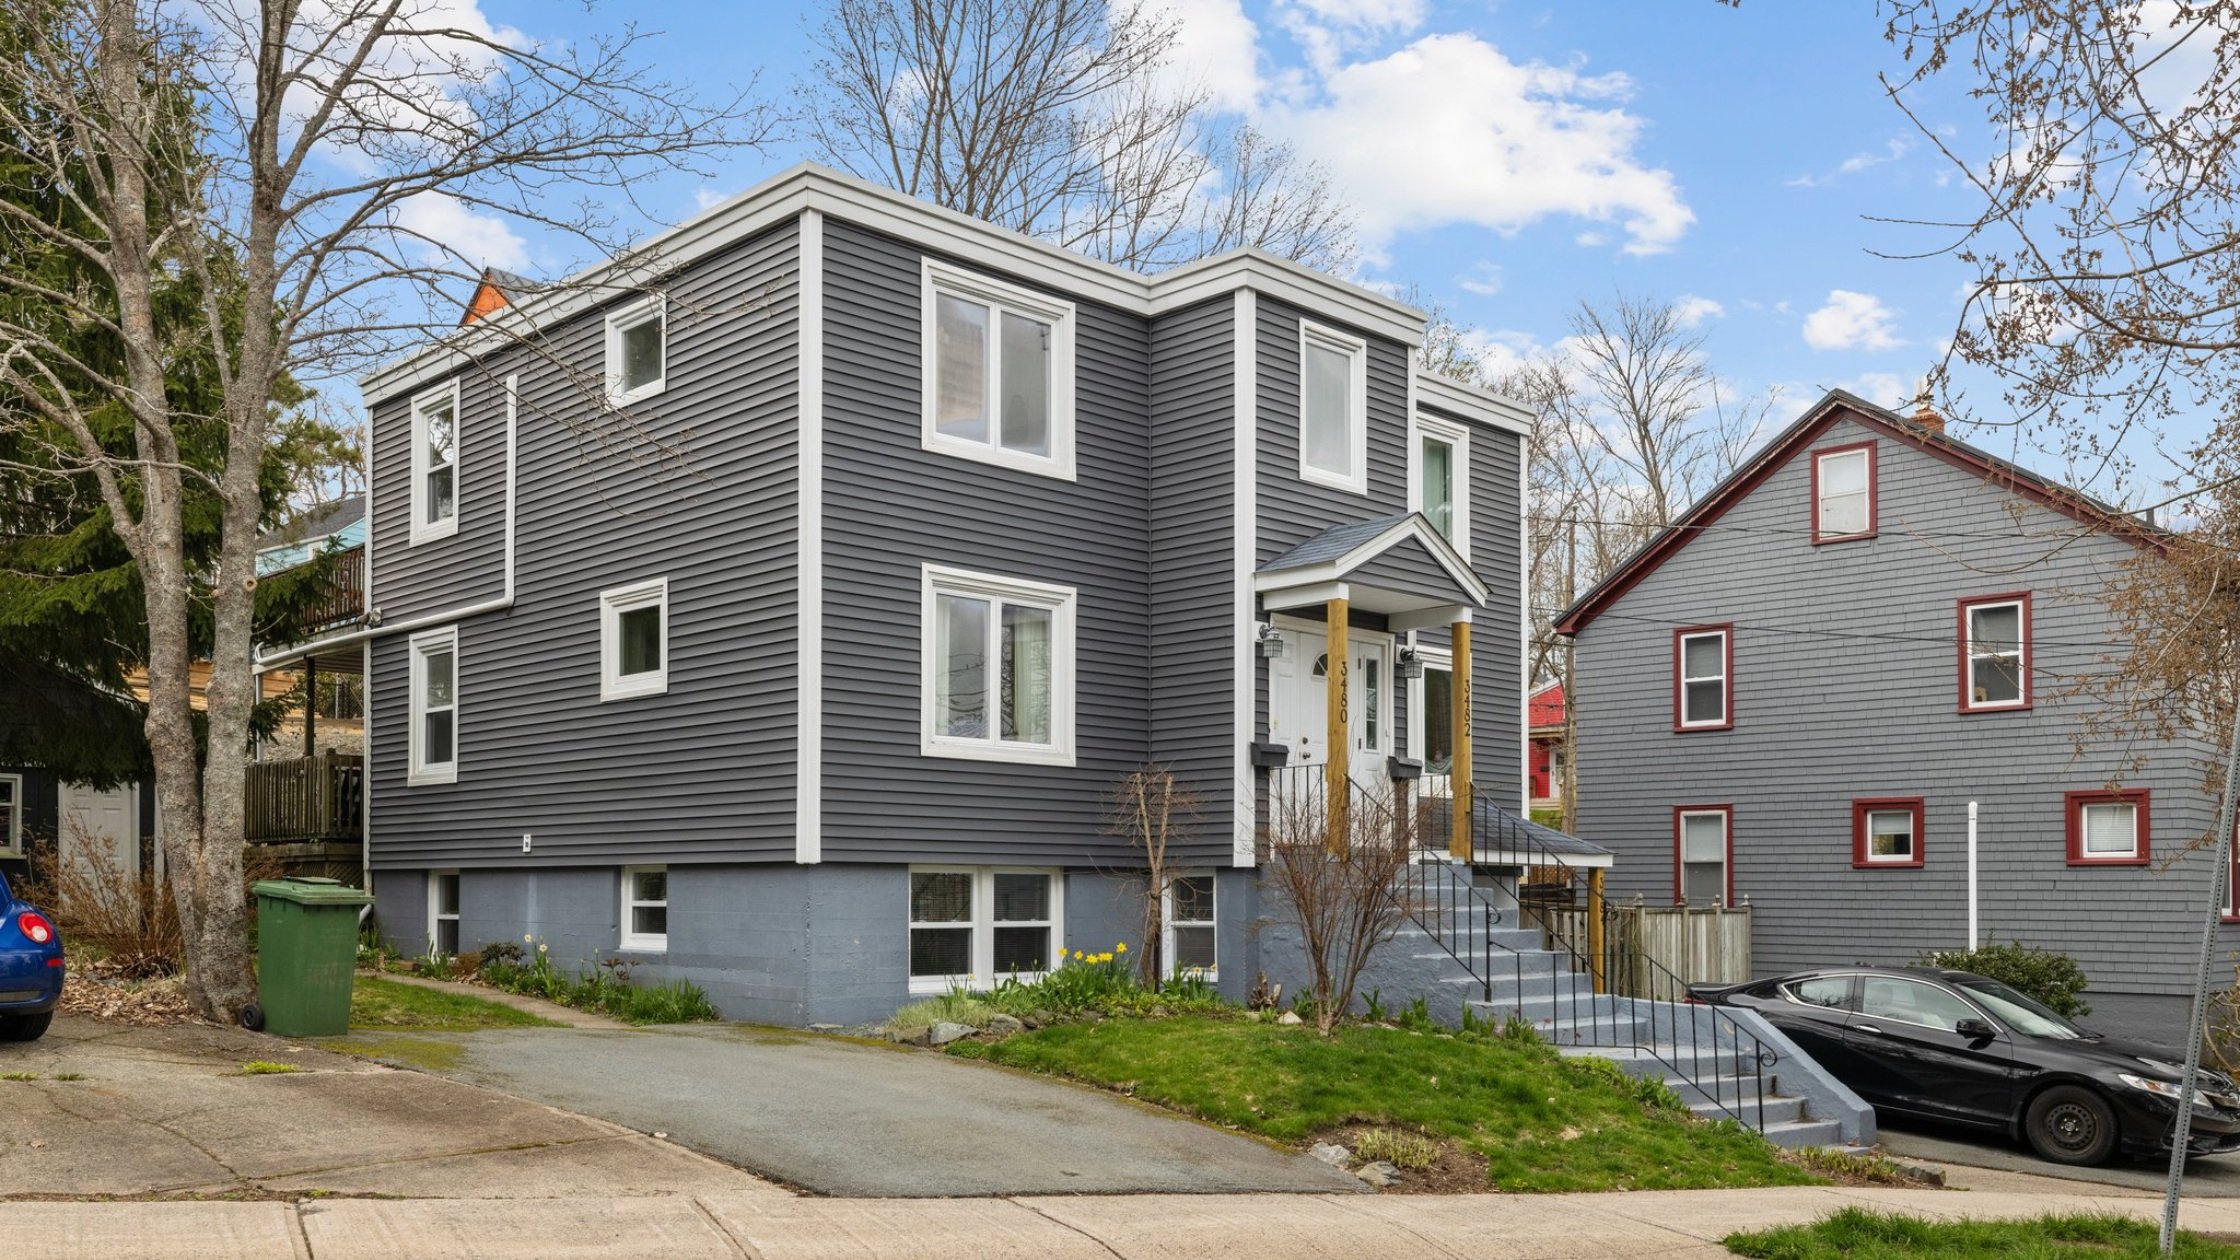  Featured Listing    3482 Dartmouth Ave    View Listing  